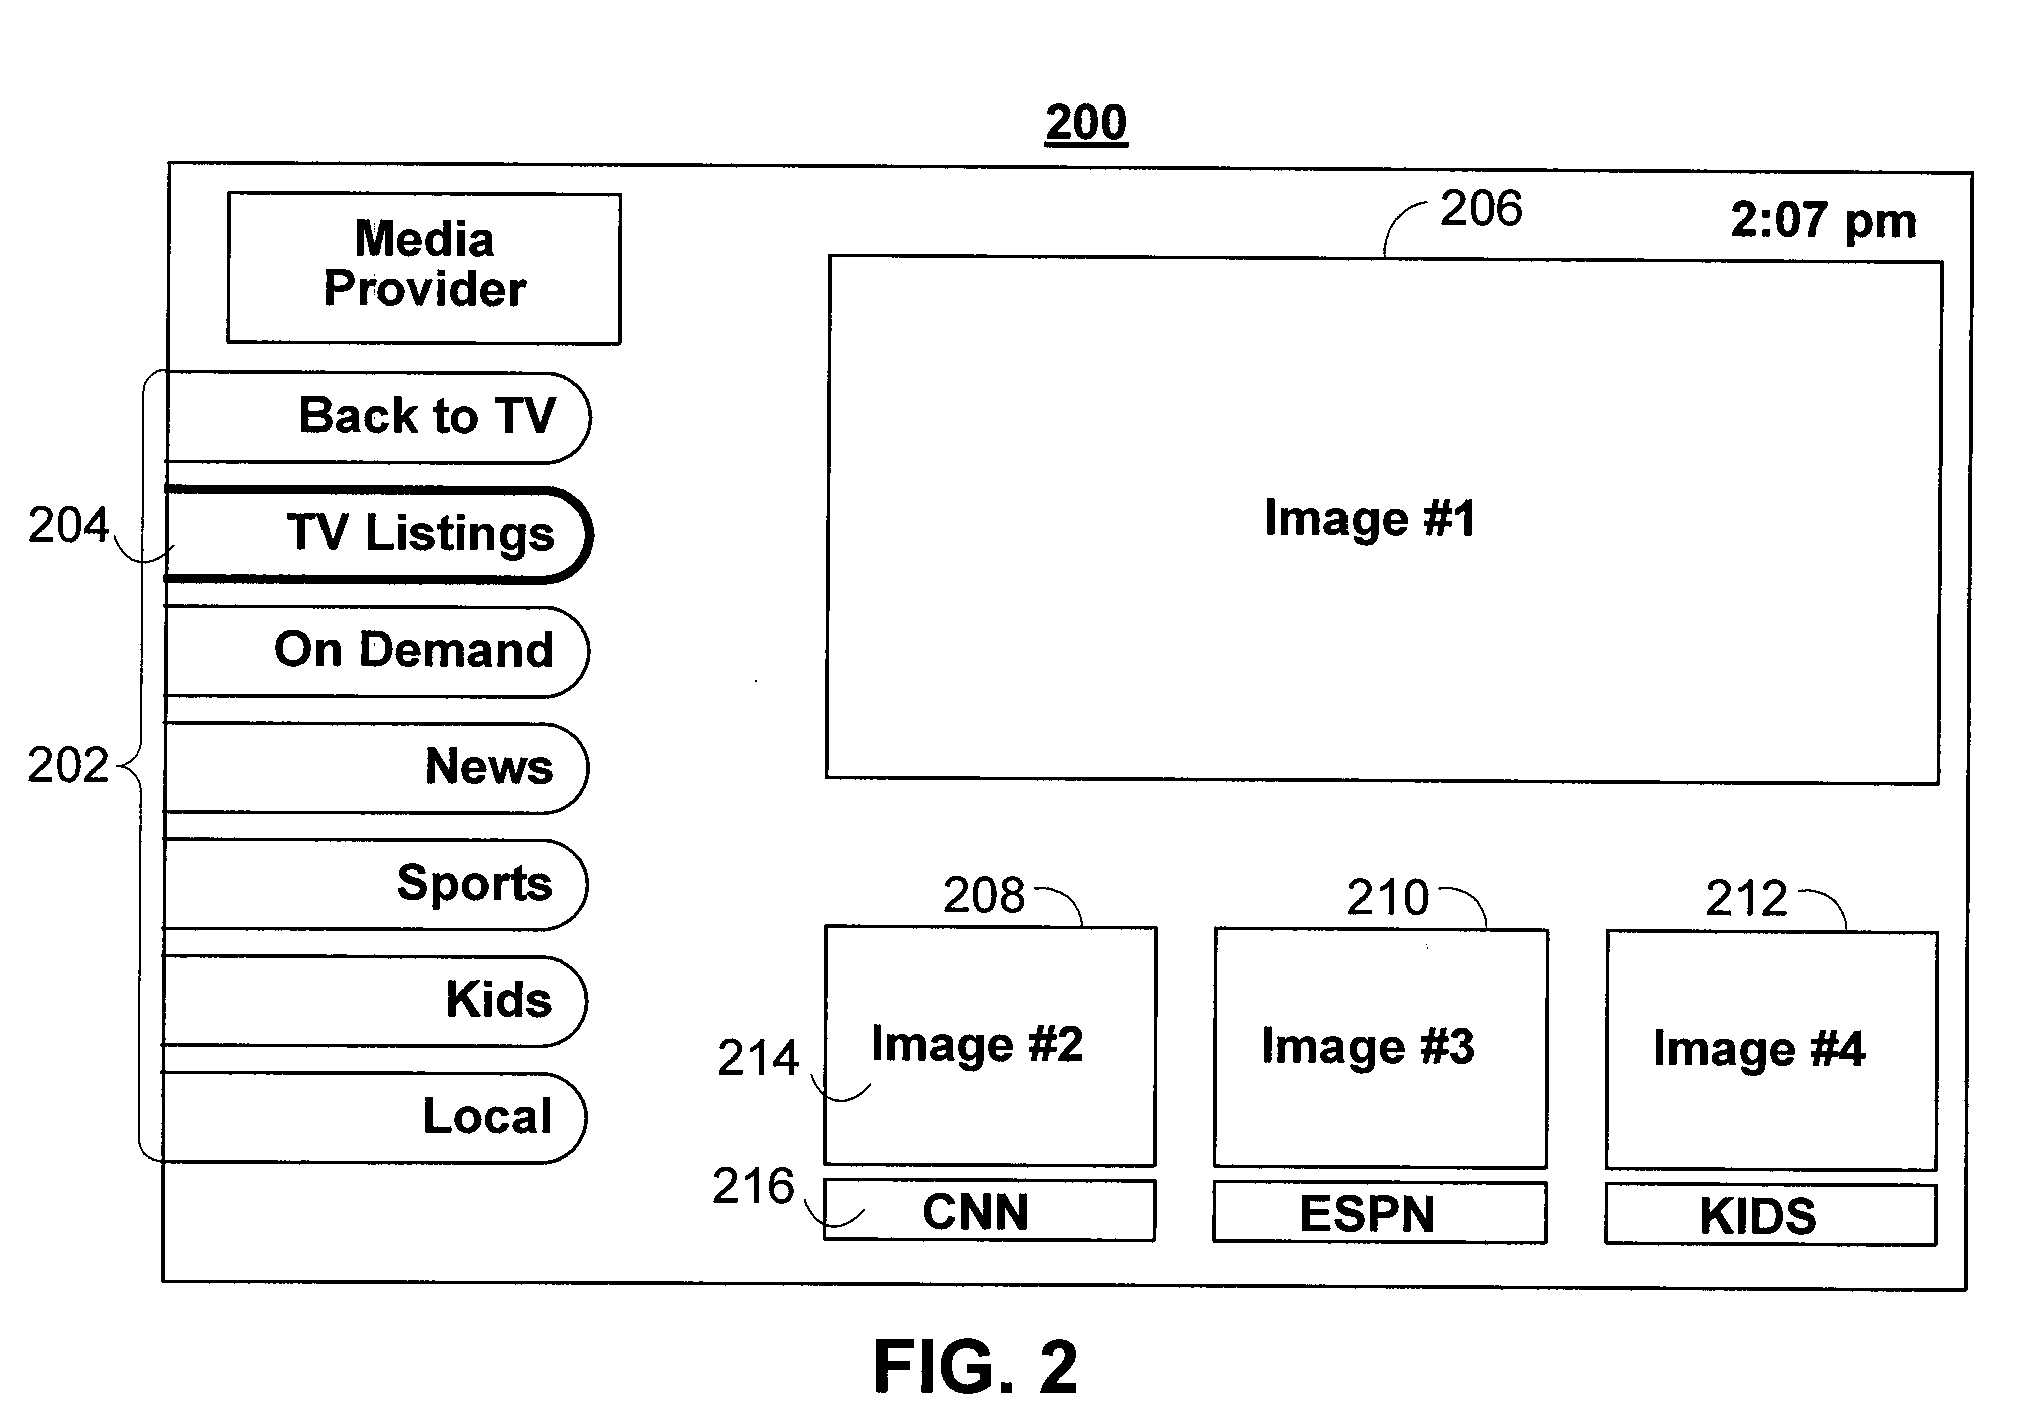 Systems and methods for initializing allocations of transport streams based on historical data